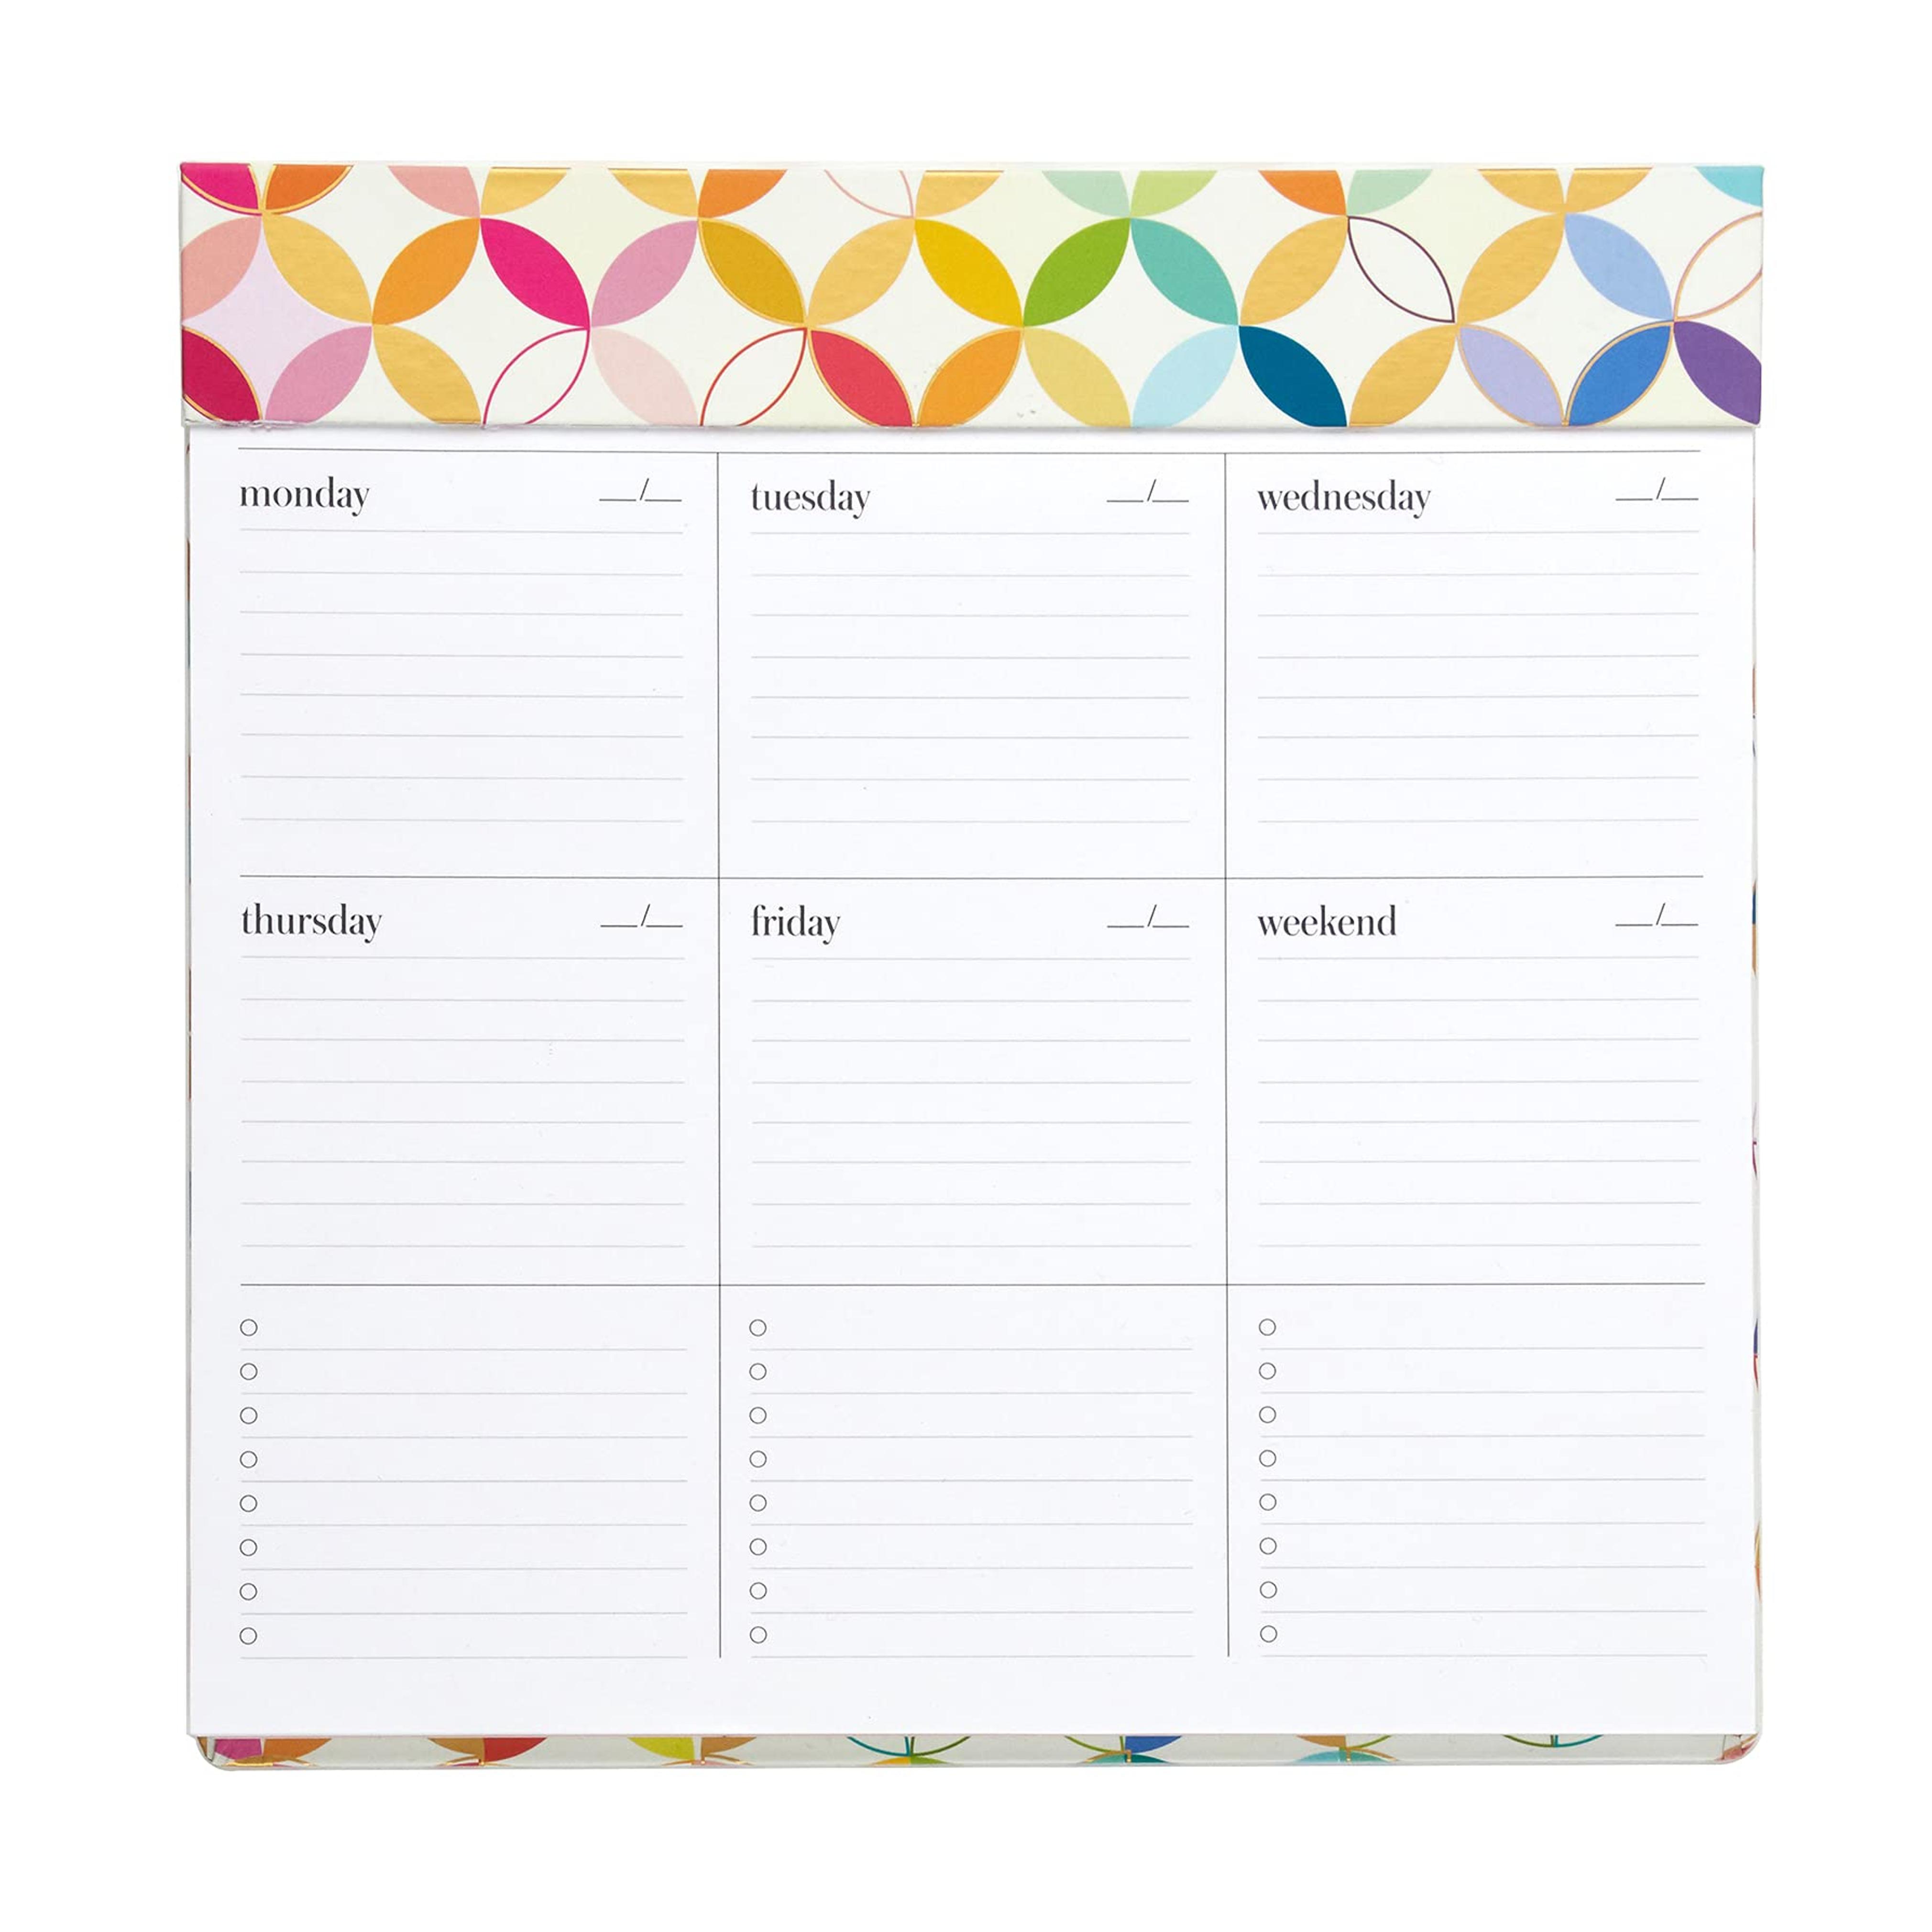 Designer Schedule Pad - Mid Century Circles. 52 Perforated Sheets. 10" x 10". Weekly Schedule Organizer Planner Pad with To-Do Lists and Notes Sections by Erin Condren.